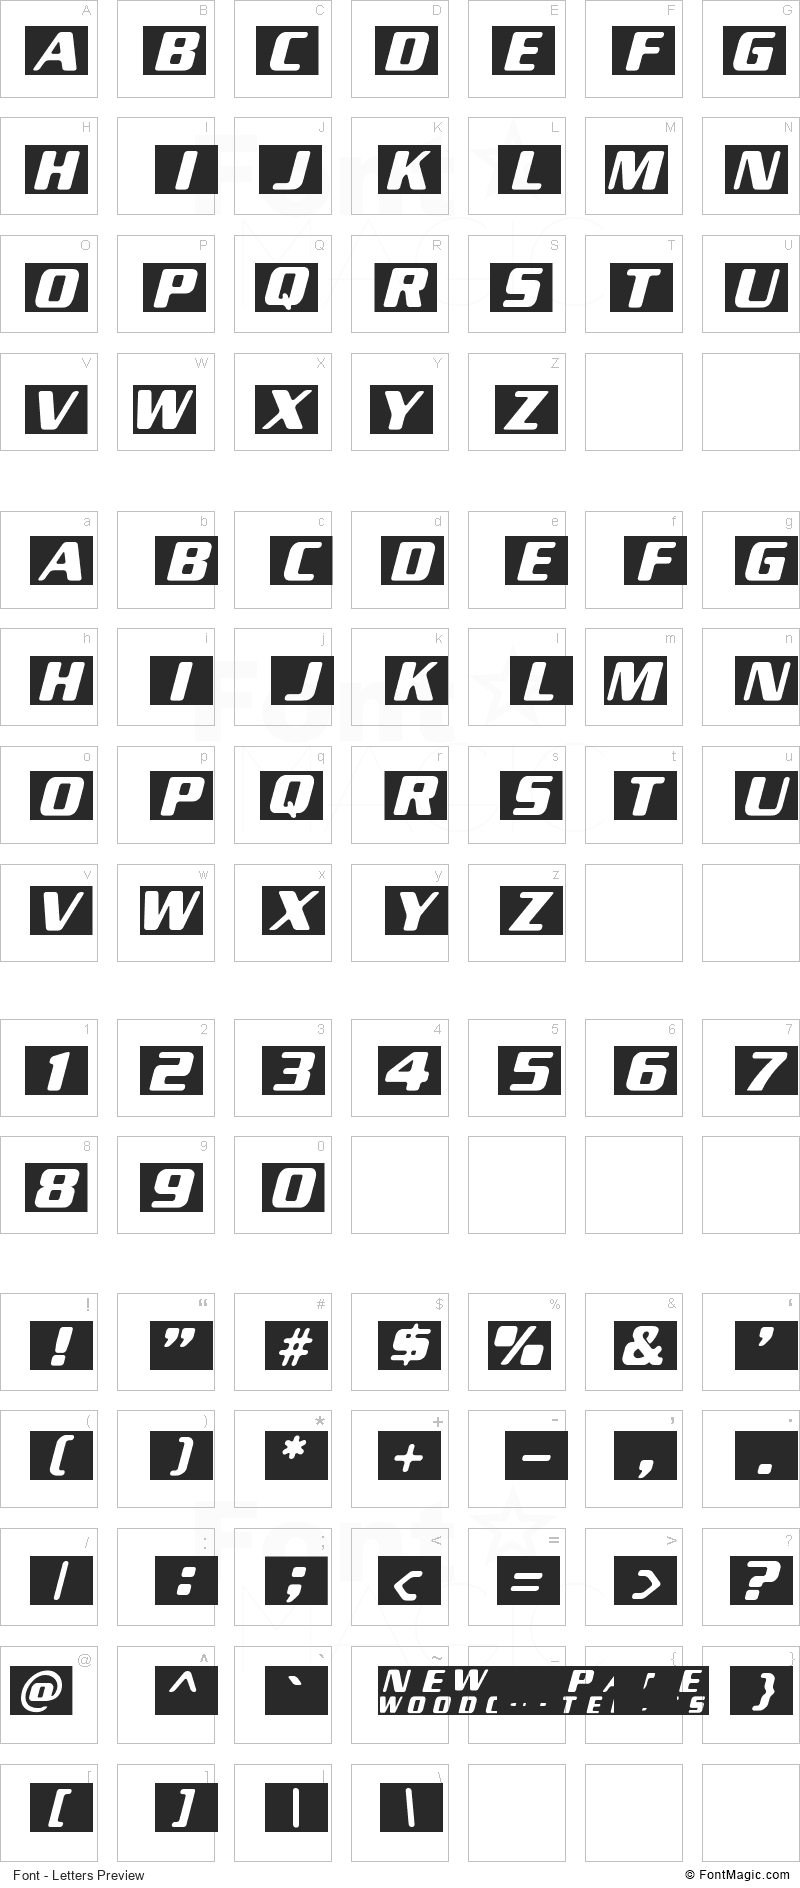 New Space Font - All Latters Preview Chart